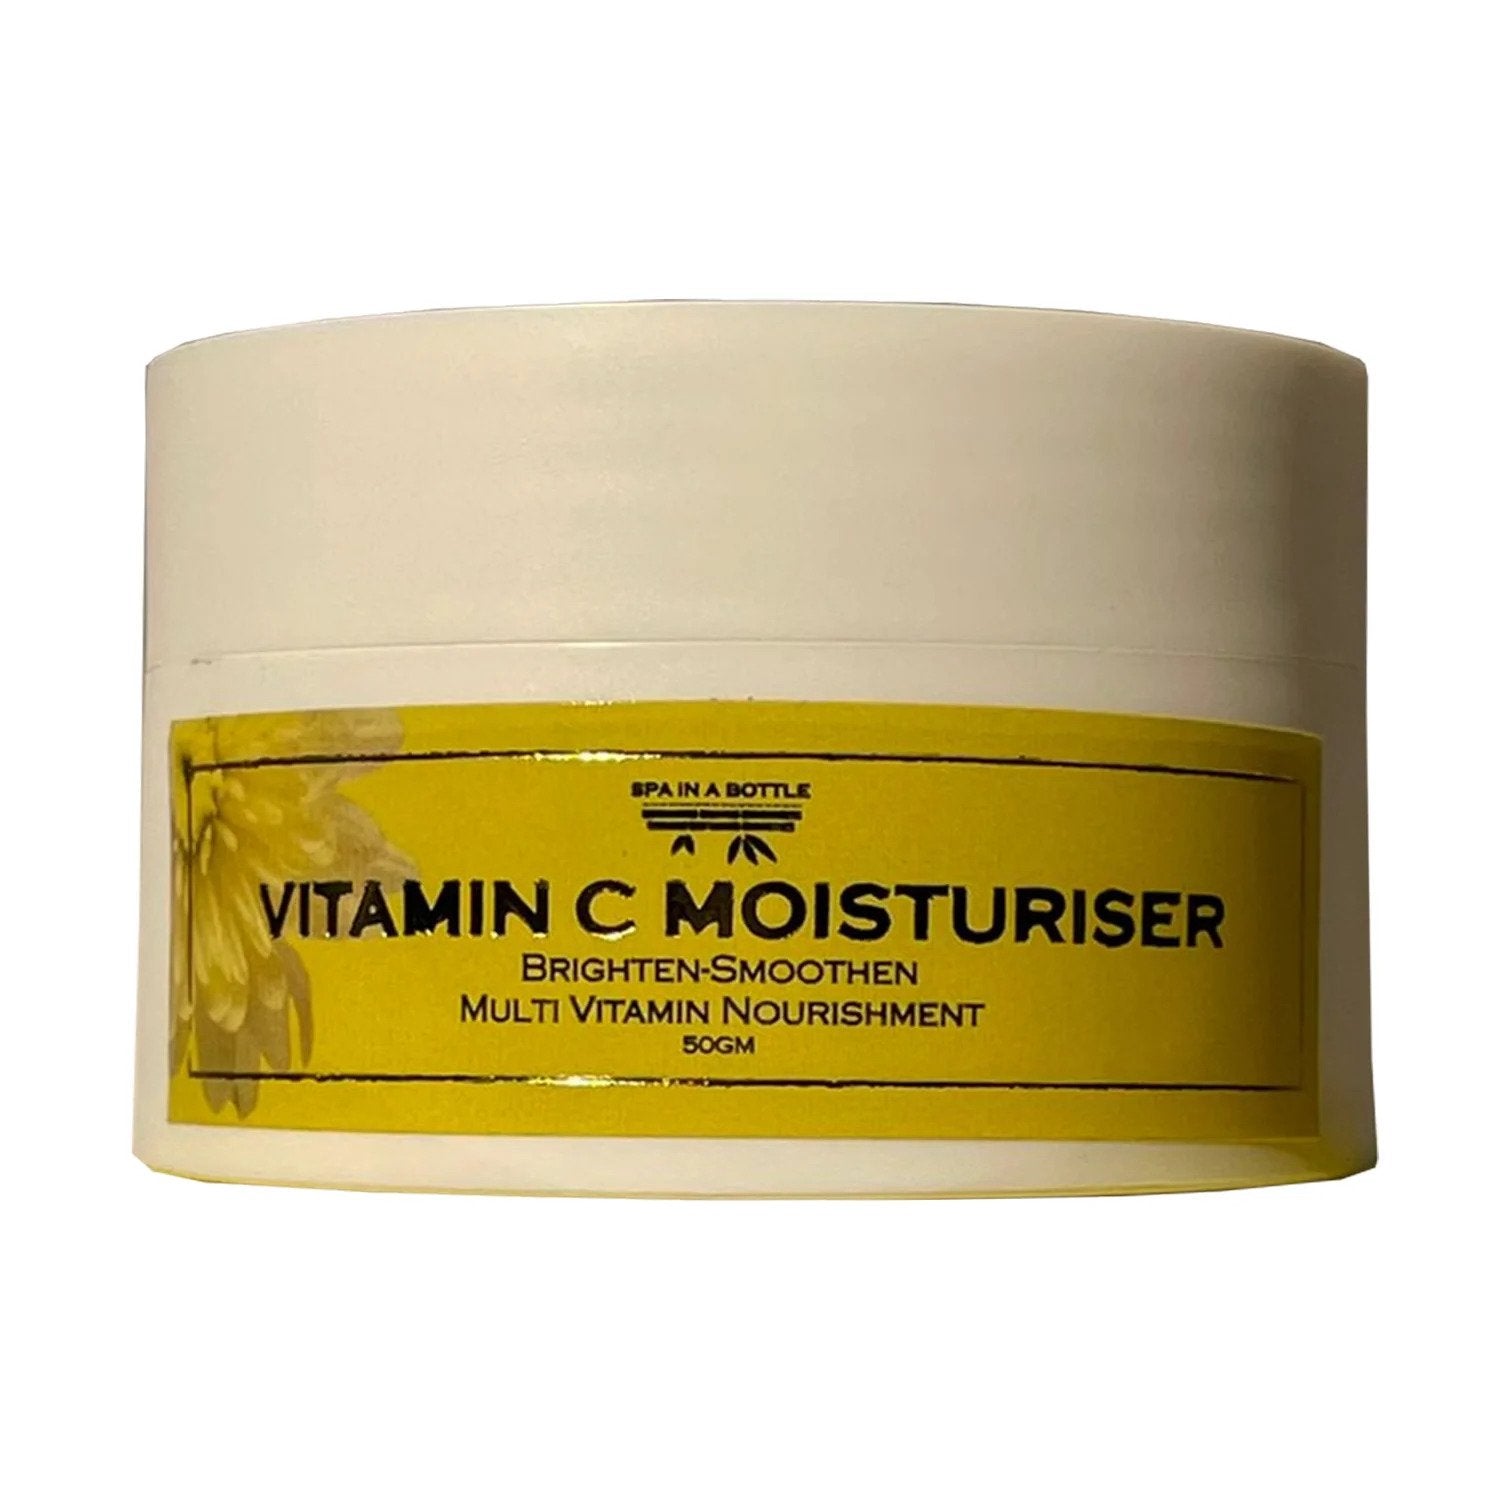 Buy Vitamin C Moisturiser from spa in a Bottle at the Best Prices online in Pakistan, Quick Delivery and Easy Returns only at The Nature's Store, Best organic and natural Moisturizer & Cream and Anti Aging, Brightening, Glow, Pigmentation, Whitening in Pakistan, 